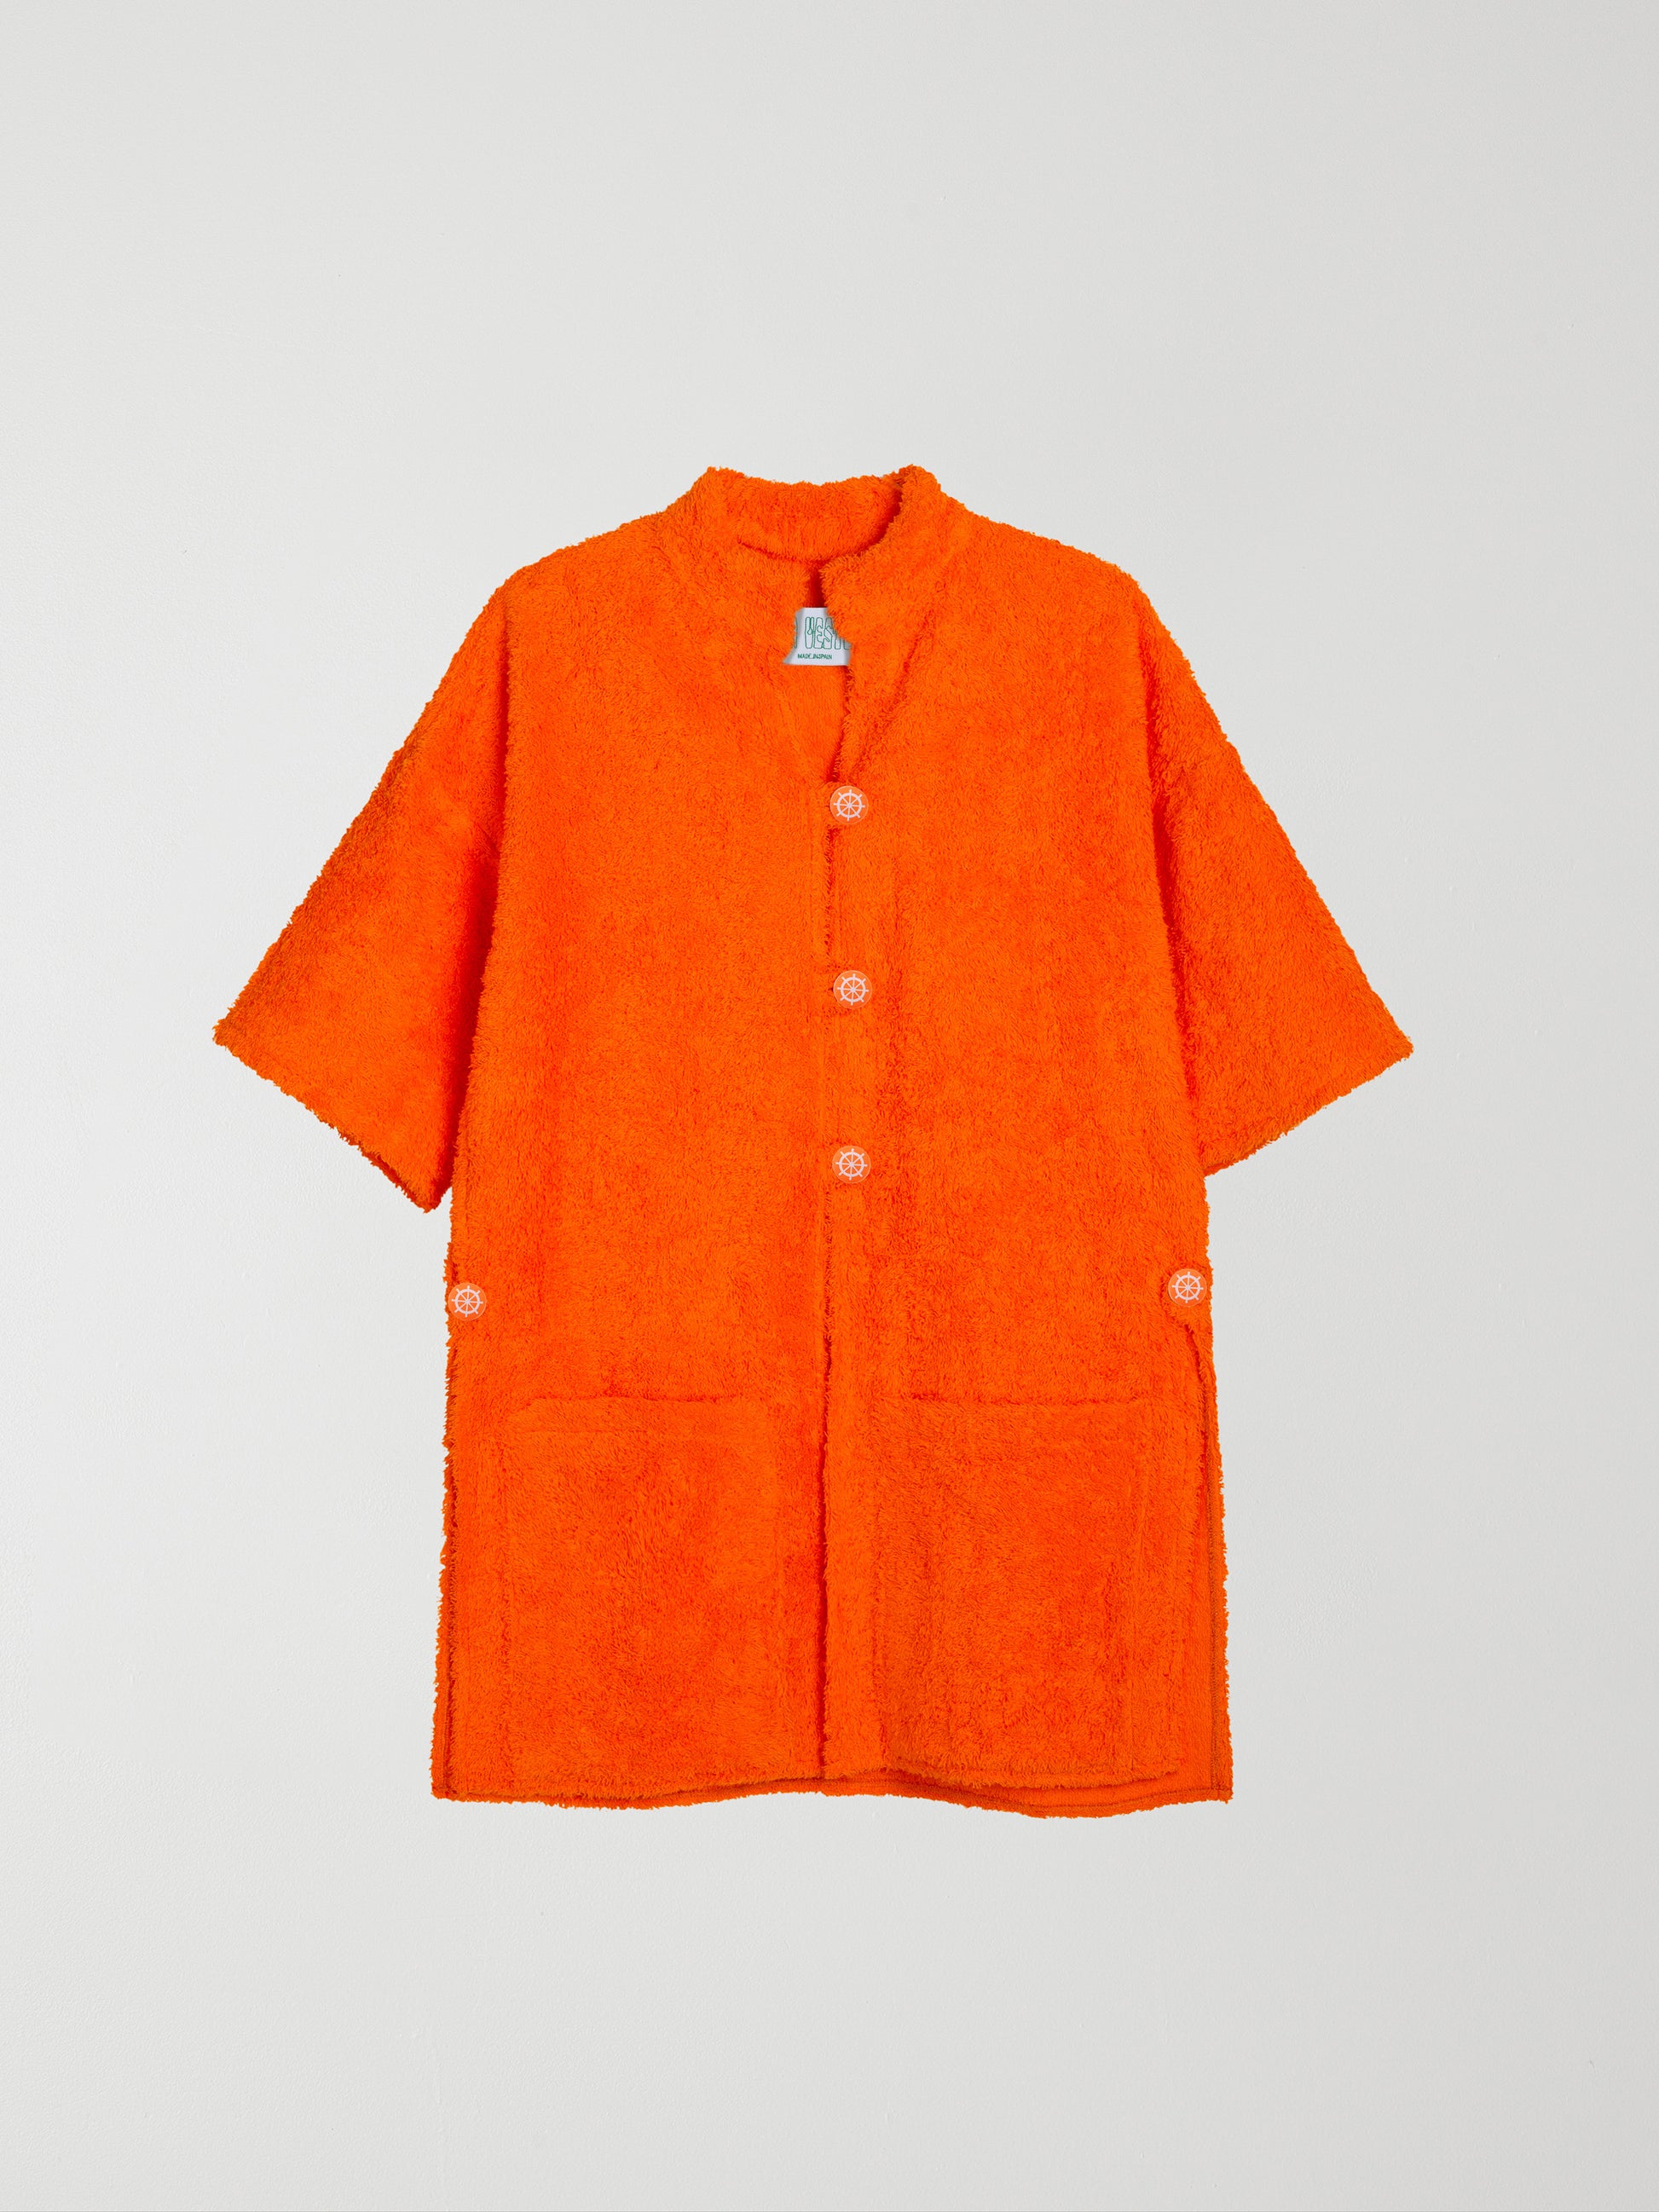 Short towel kimono made in&nbsp;orange cotton with ship's wheel buttons